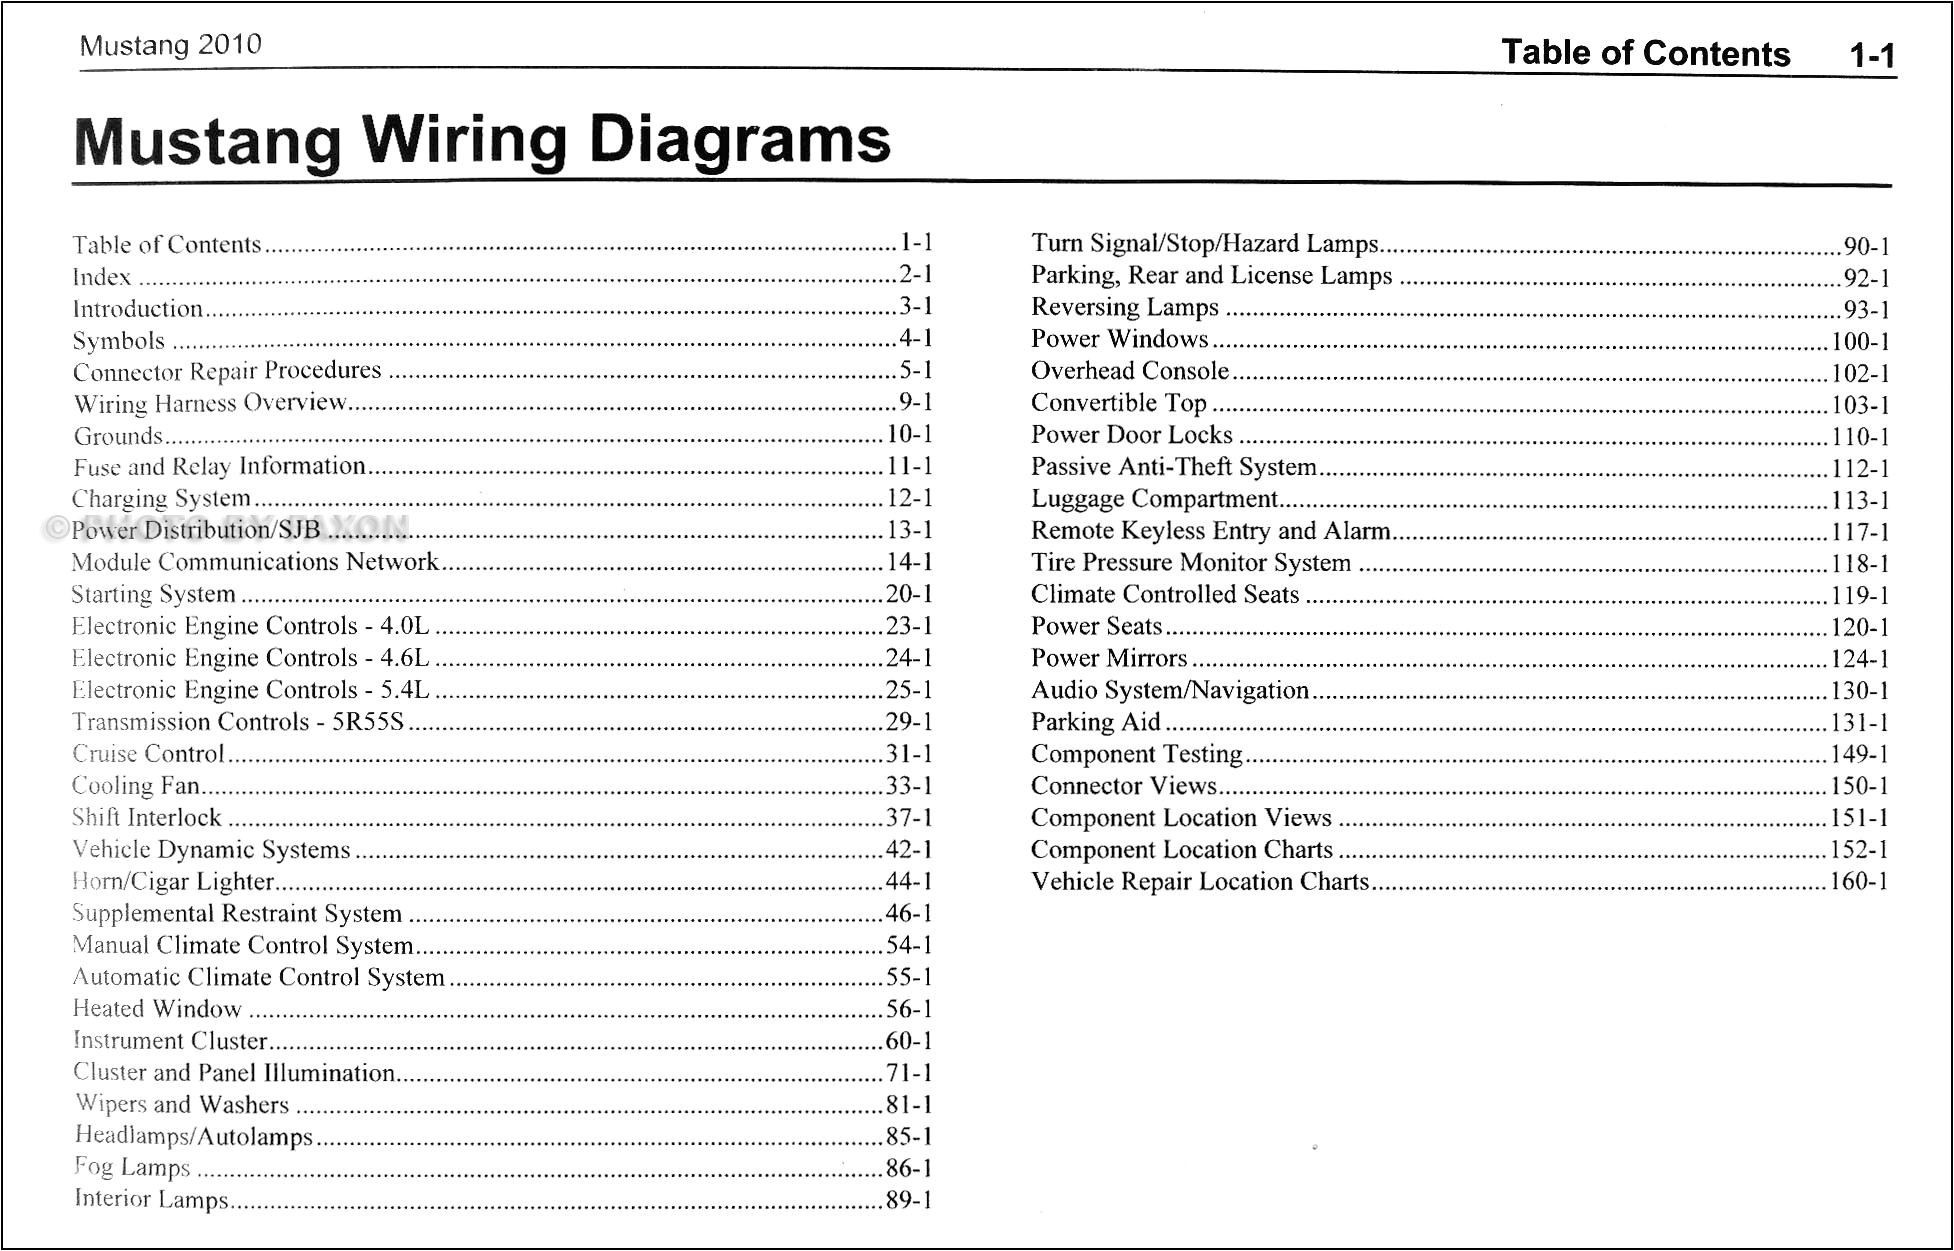 1994 ford mustang radio wiring color codes wiring diagram fascinating88 ford mustang stereo wiring color codes